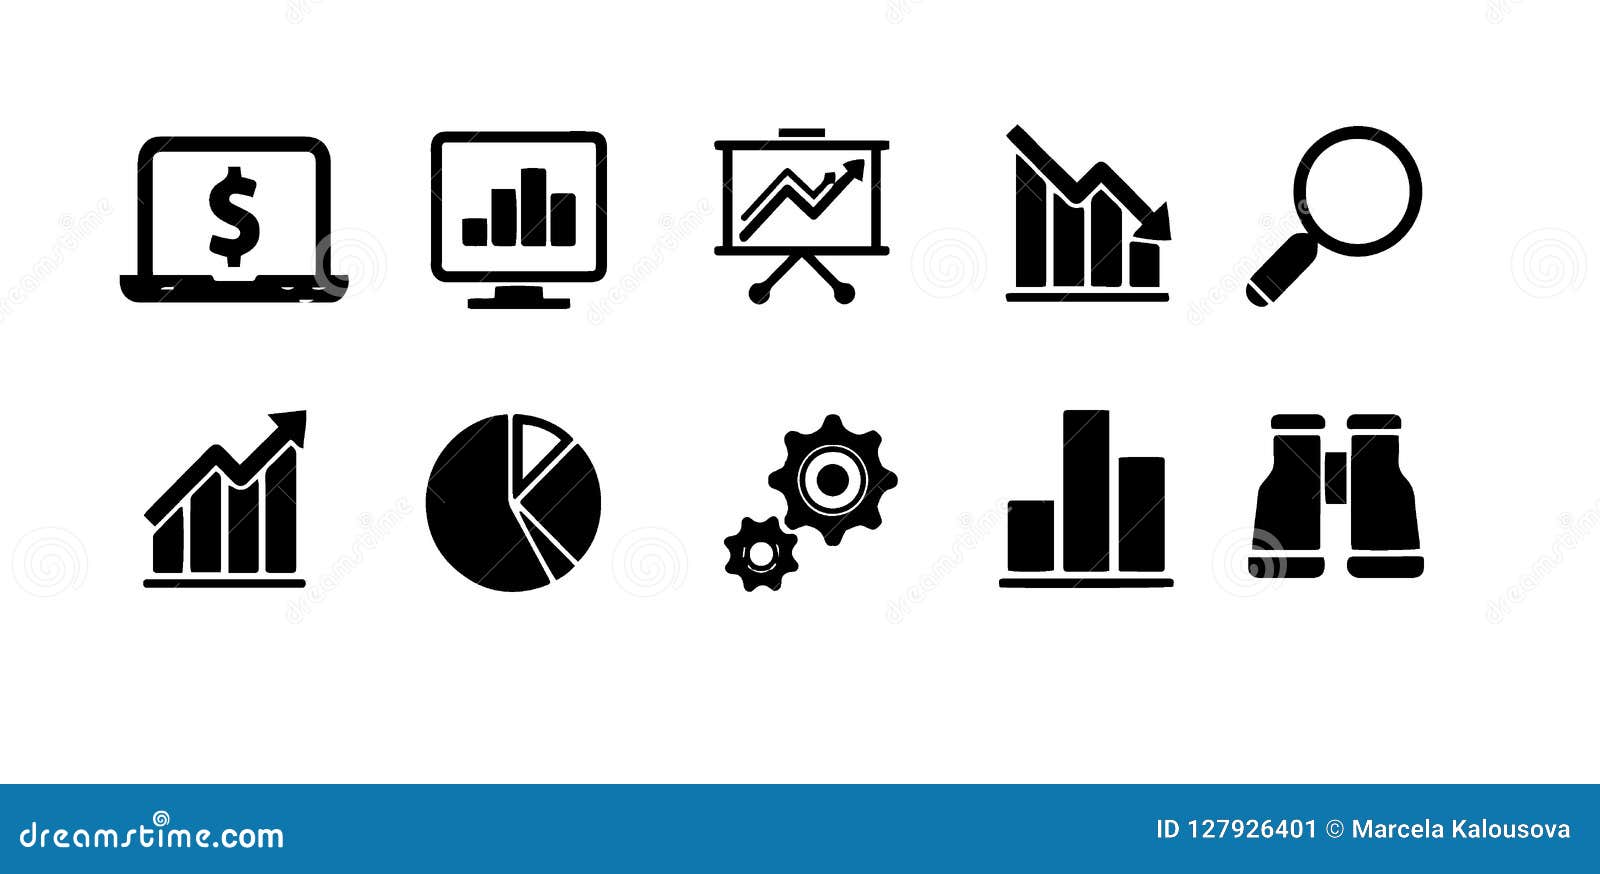 business icons set. icons for business, management, finance, strategy, marketing.